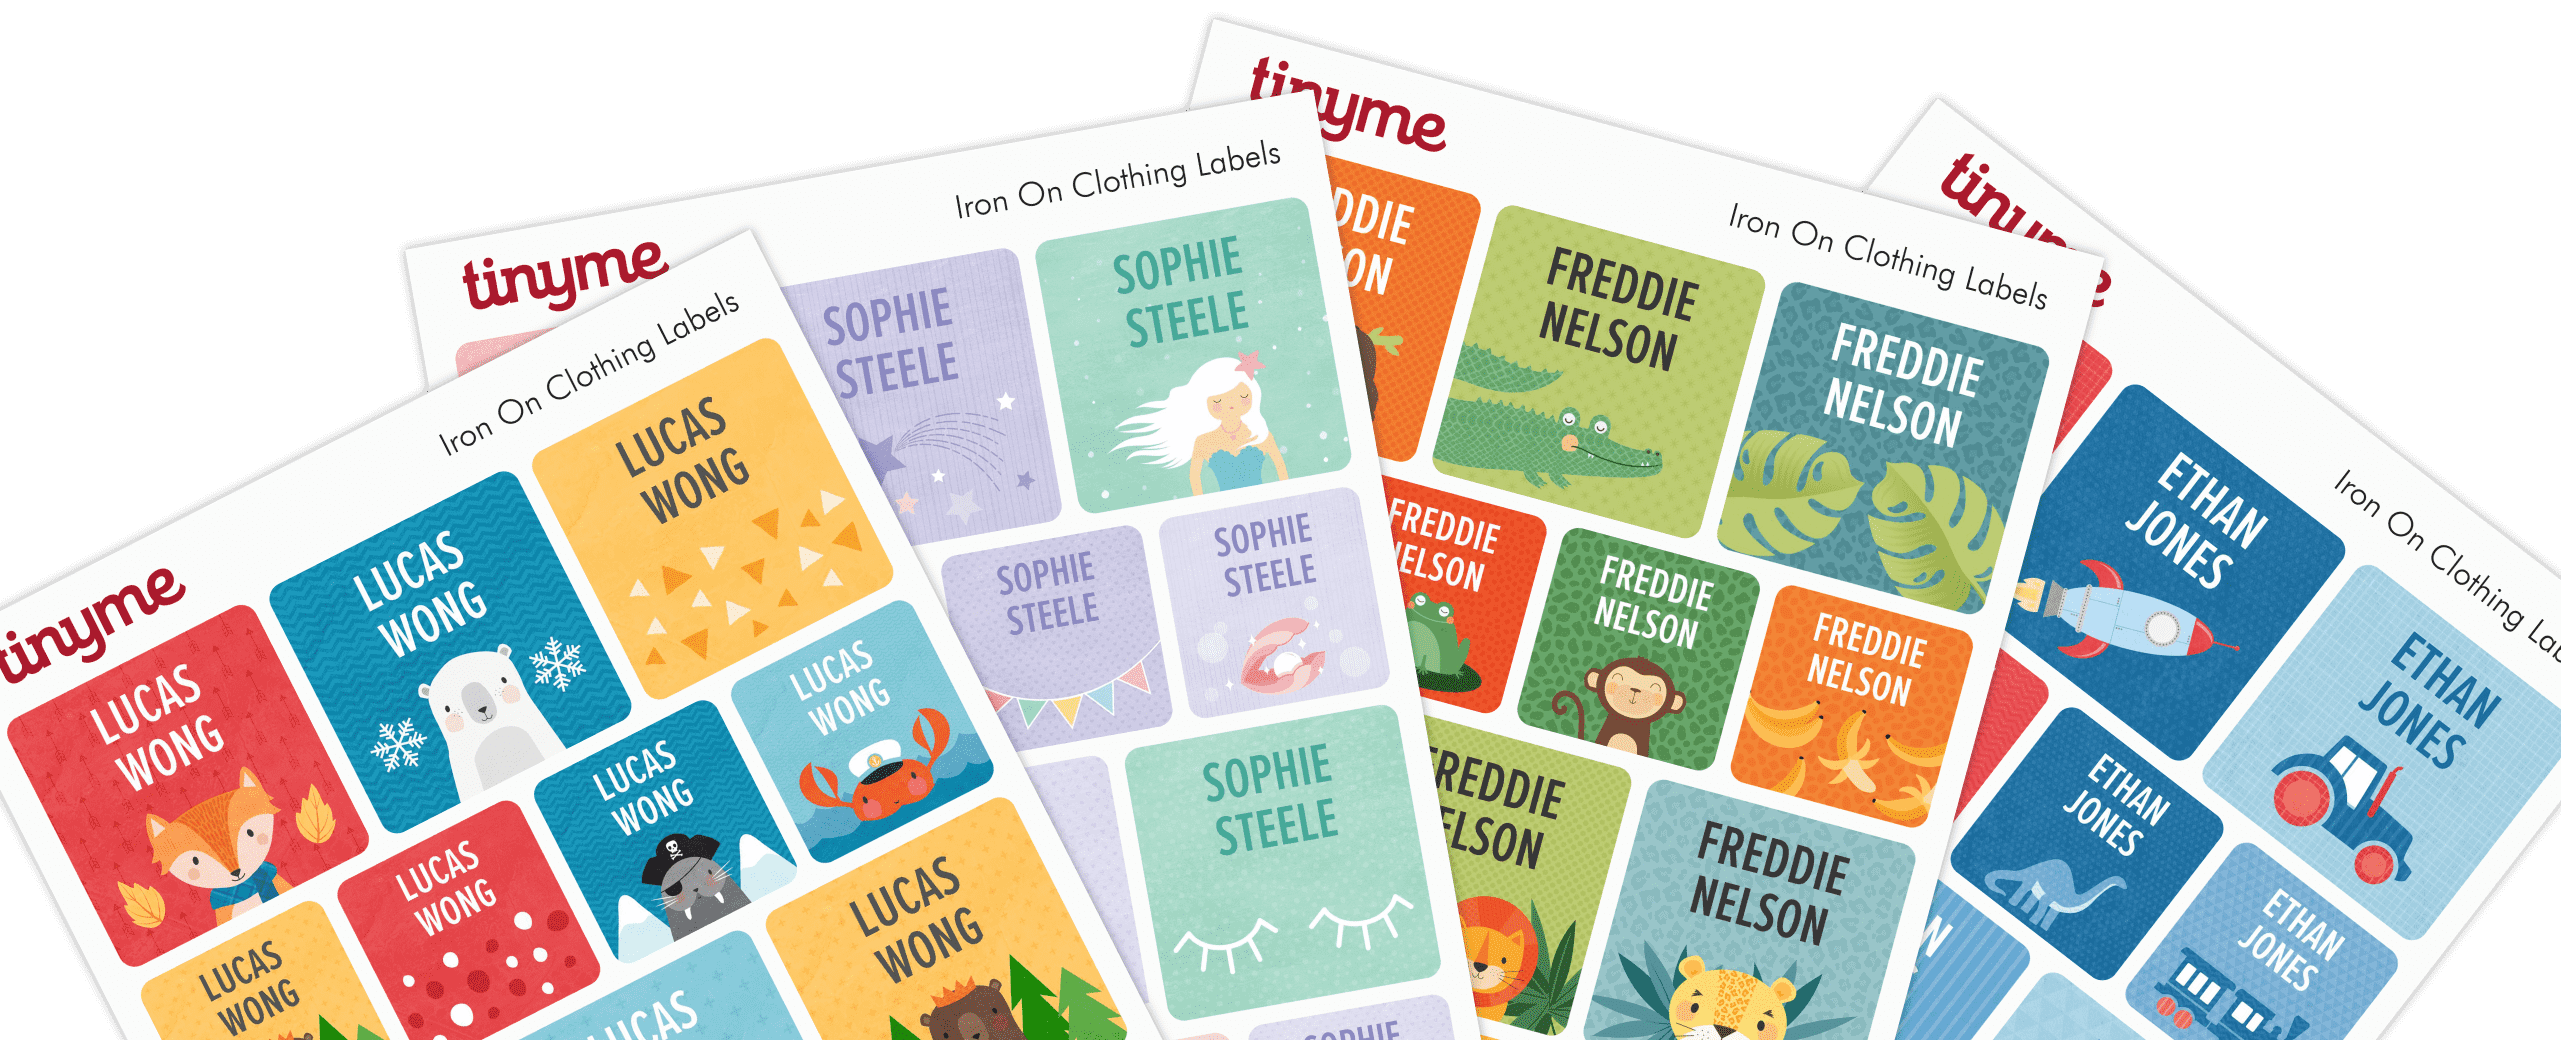 Iron On Clothing Labels - Tinyme US